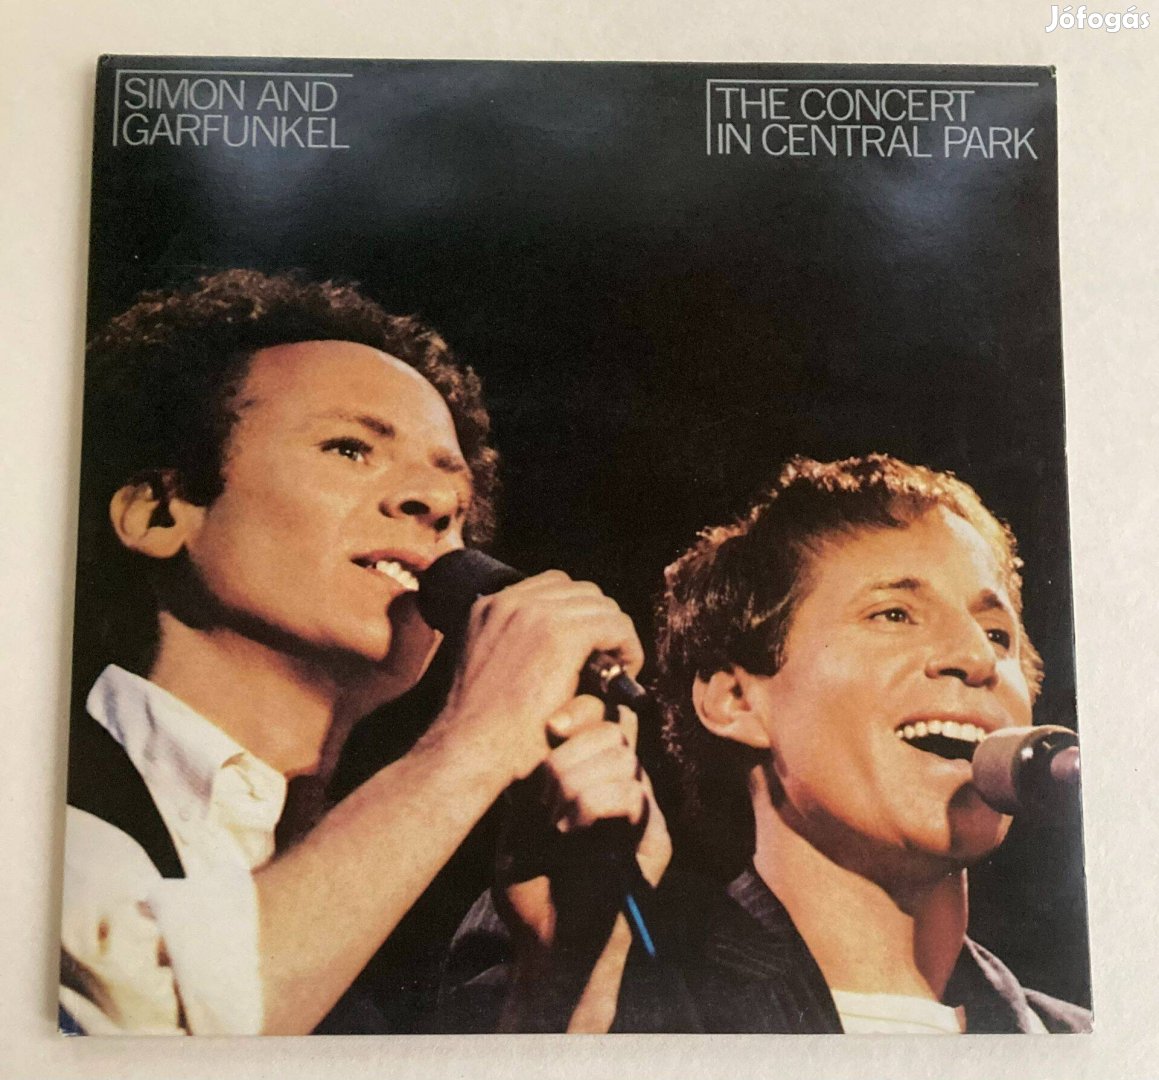 Simon and Garfunkel - The Concert in Central Park (holland, 1982, 2LP)